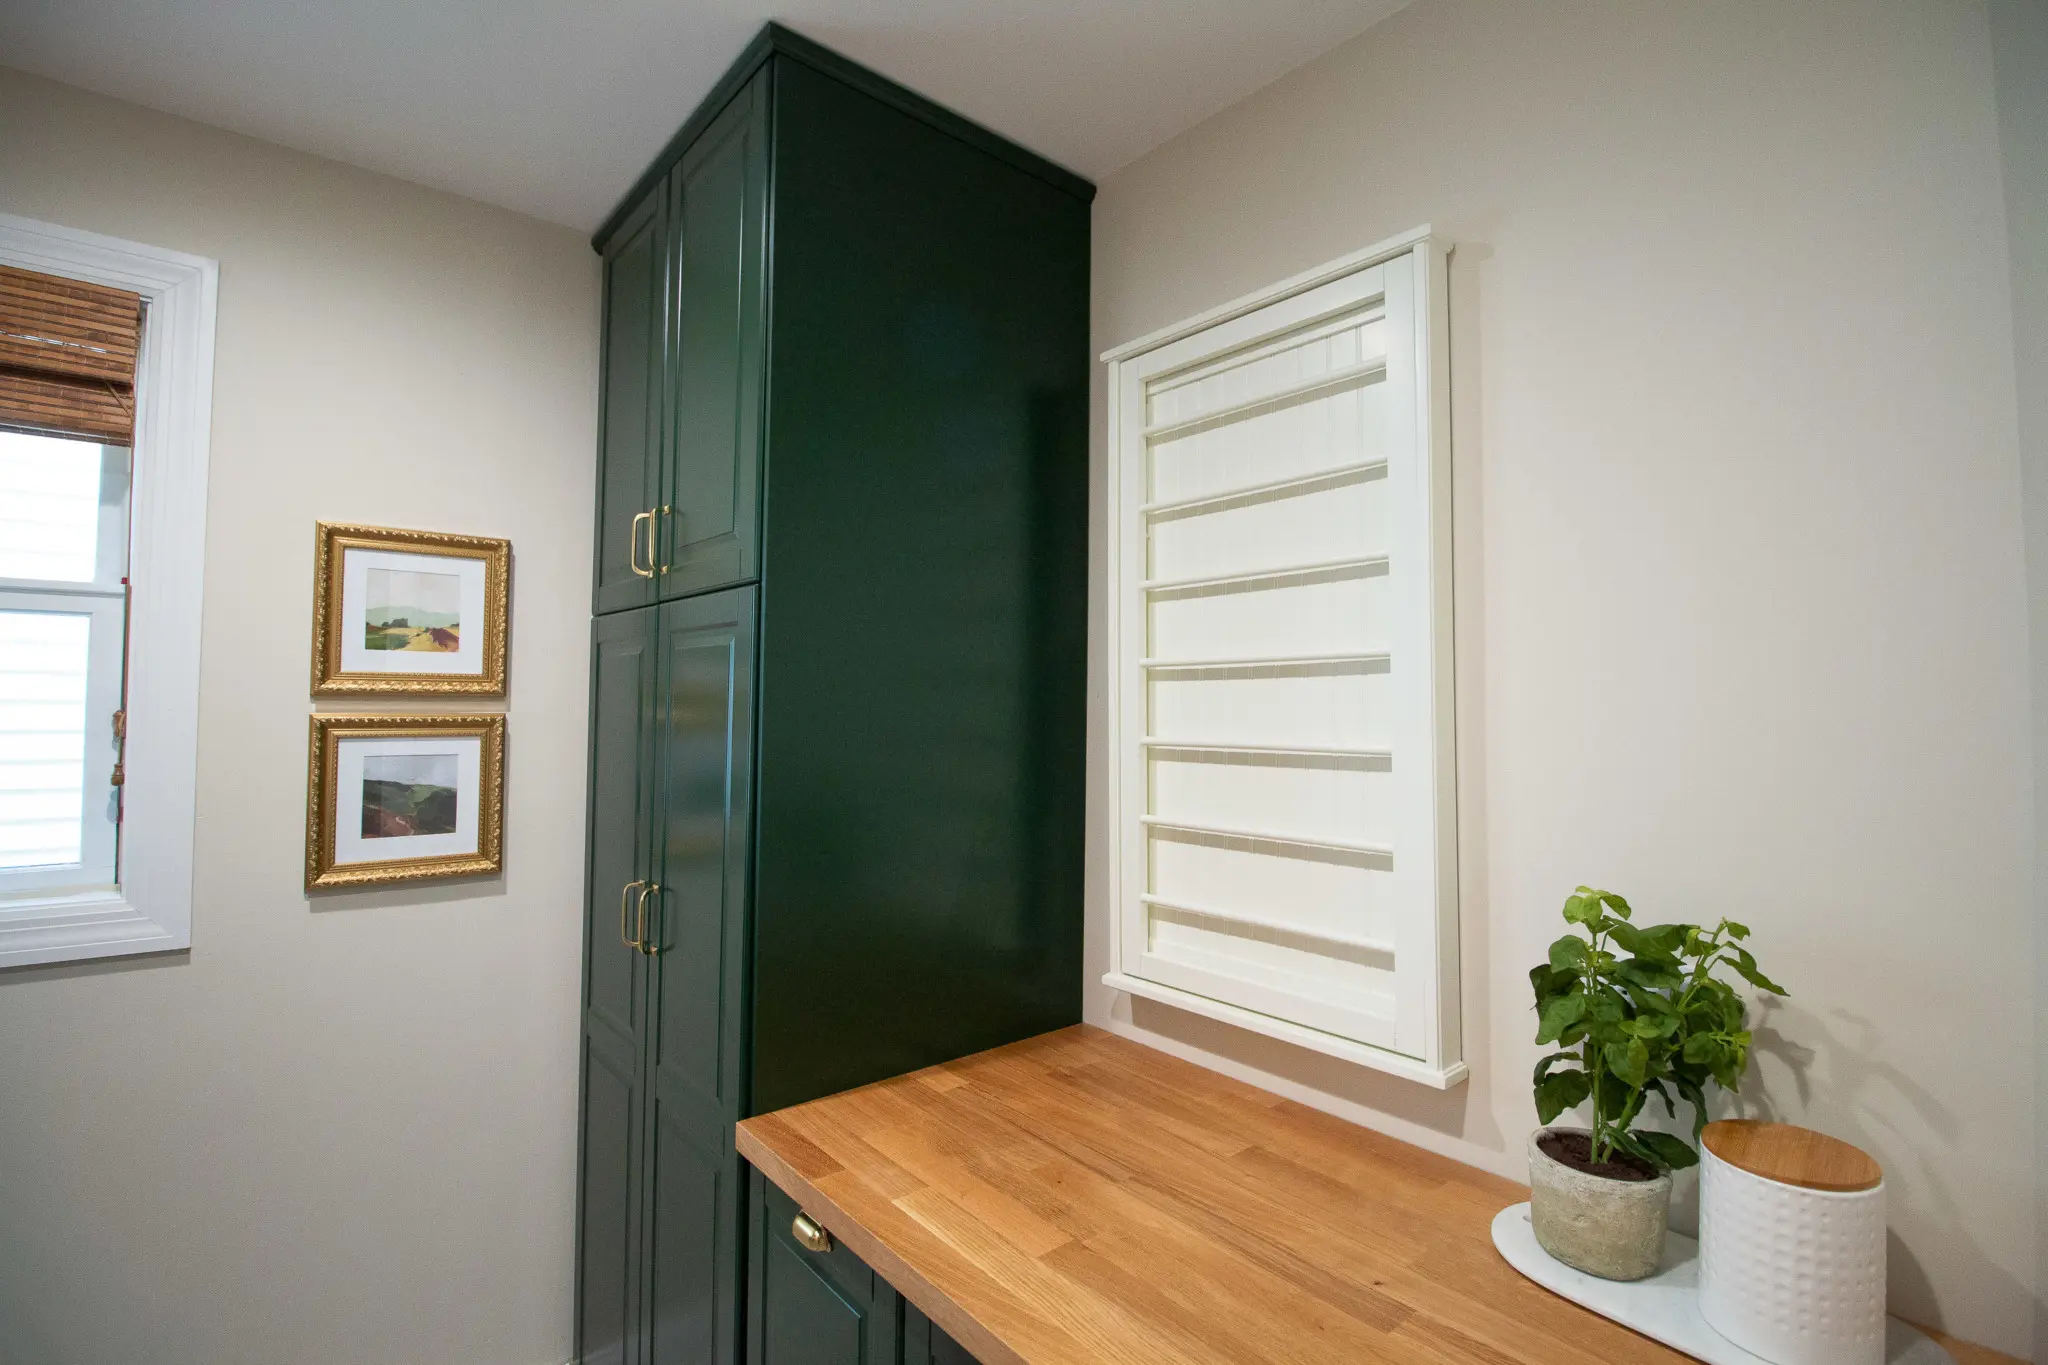 Using kitchen cabinets in a laundry room makeover